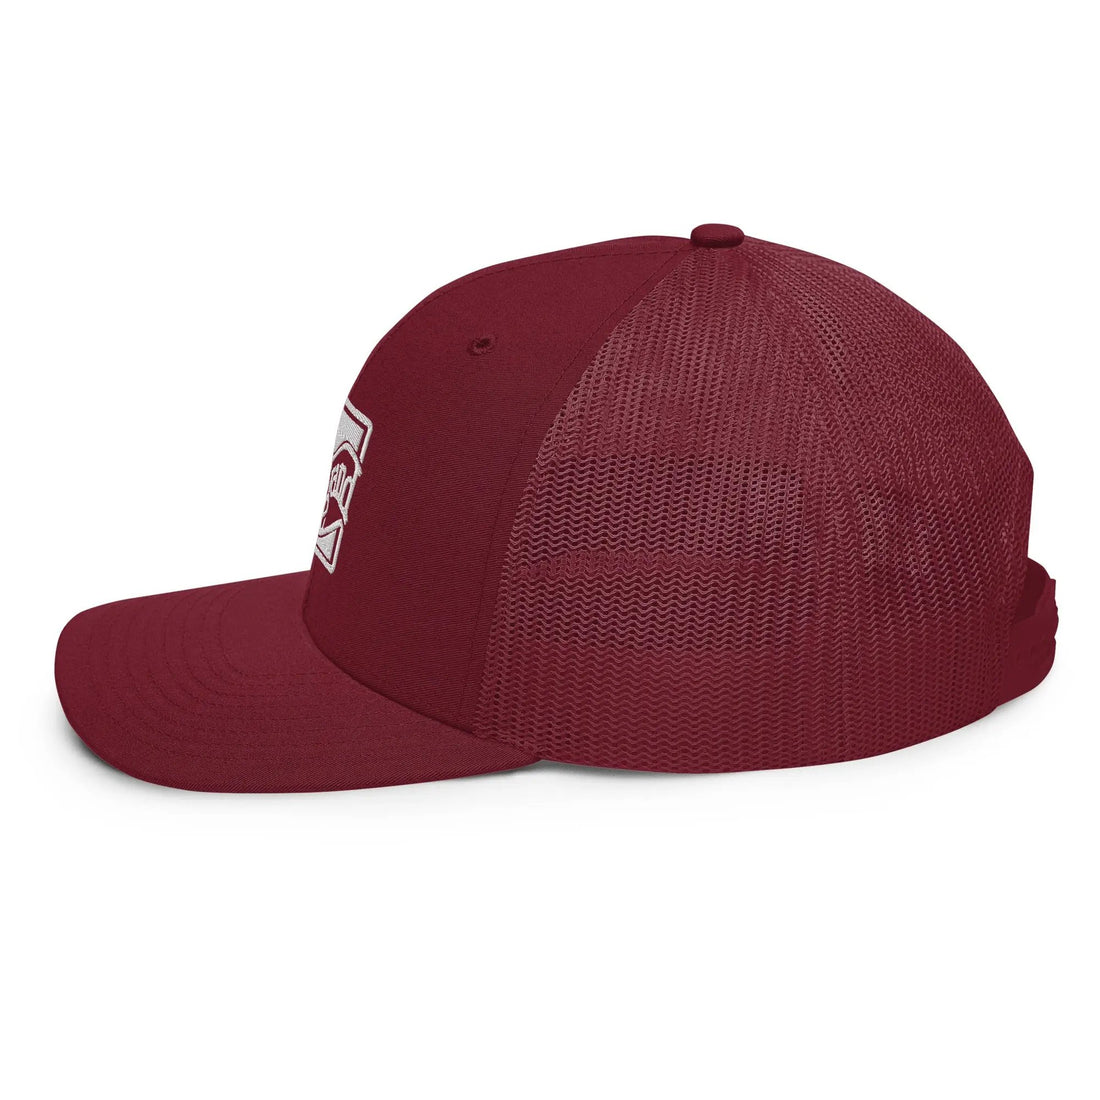 a maroon hat with a white logo on it